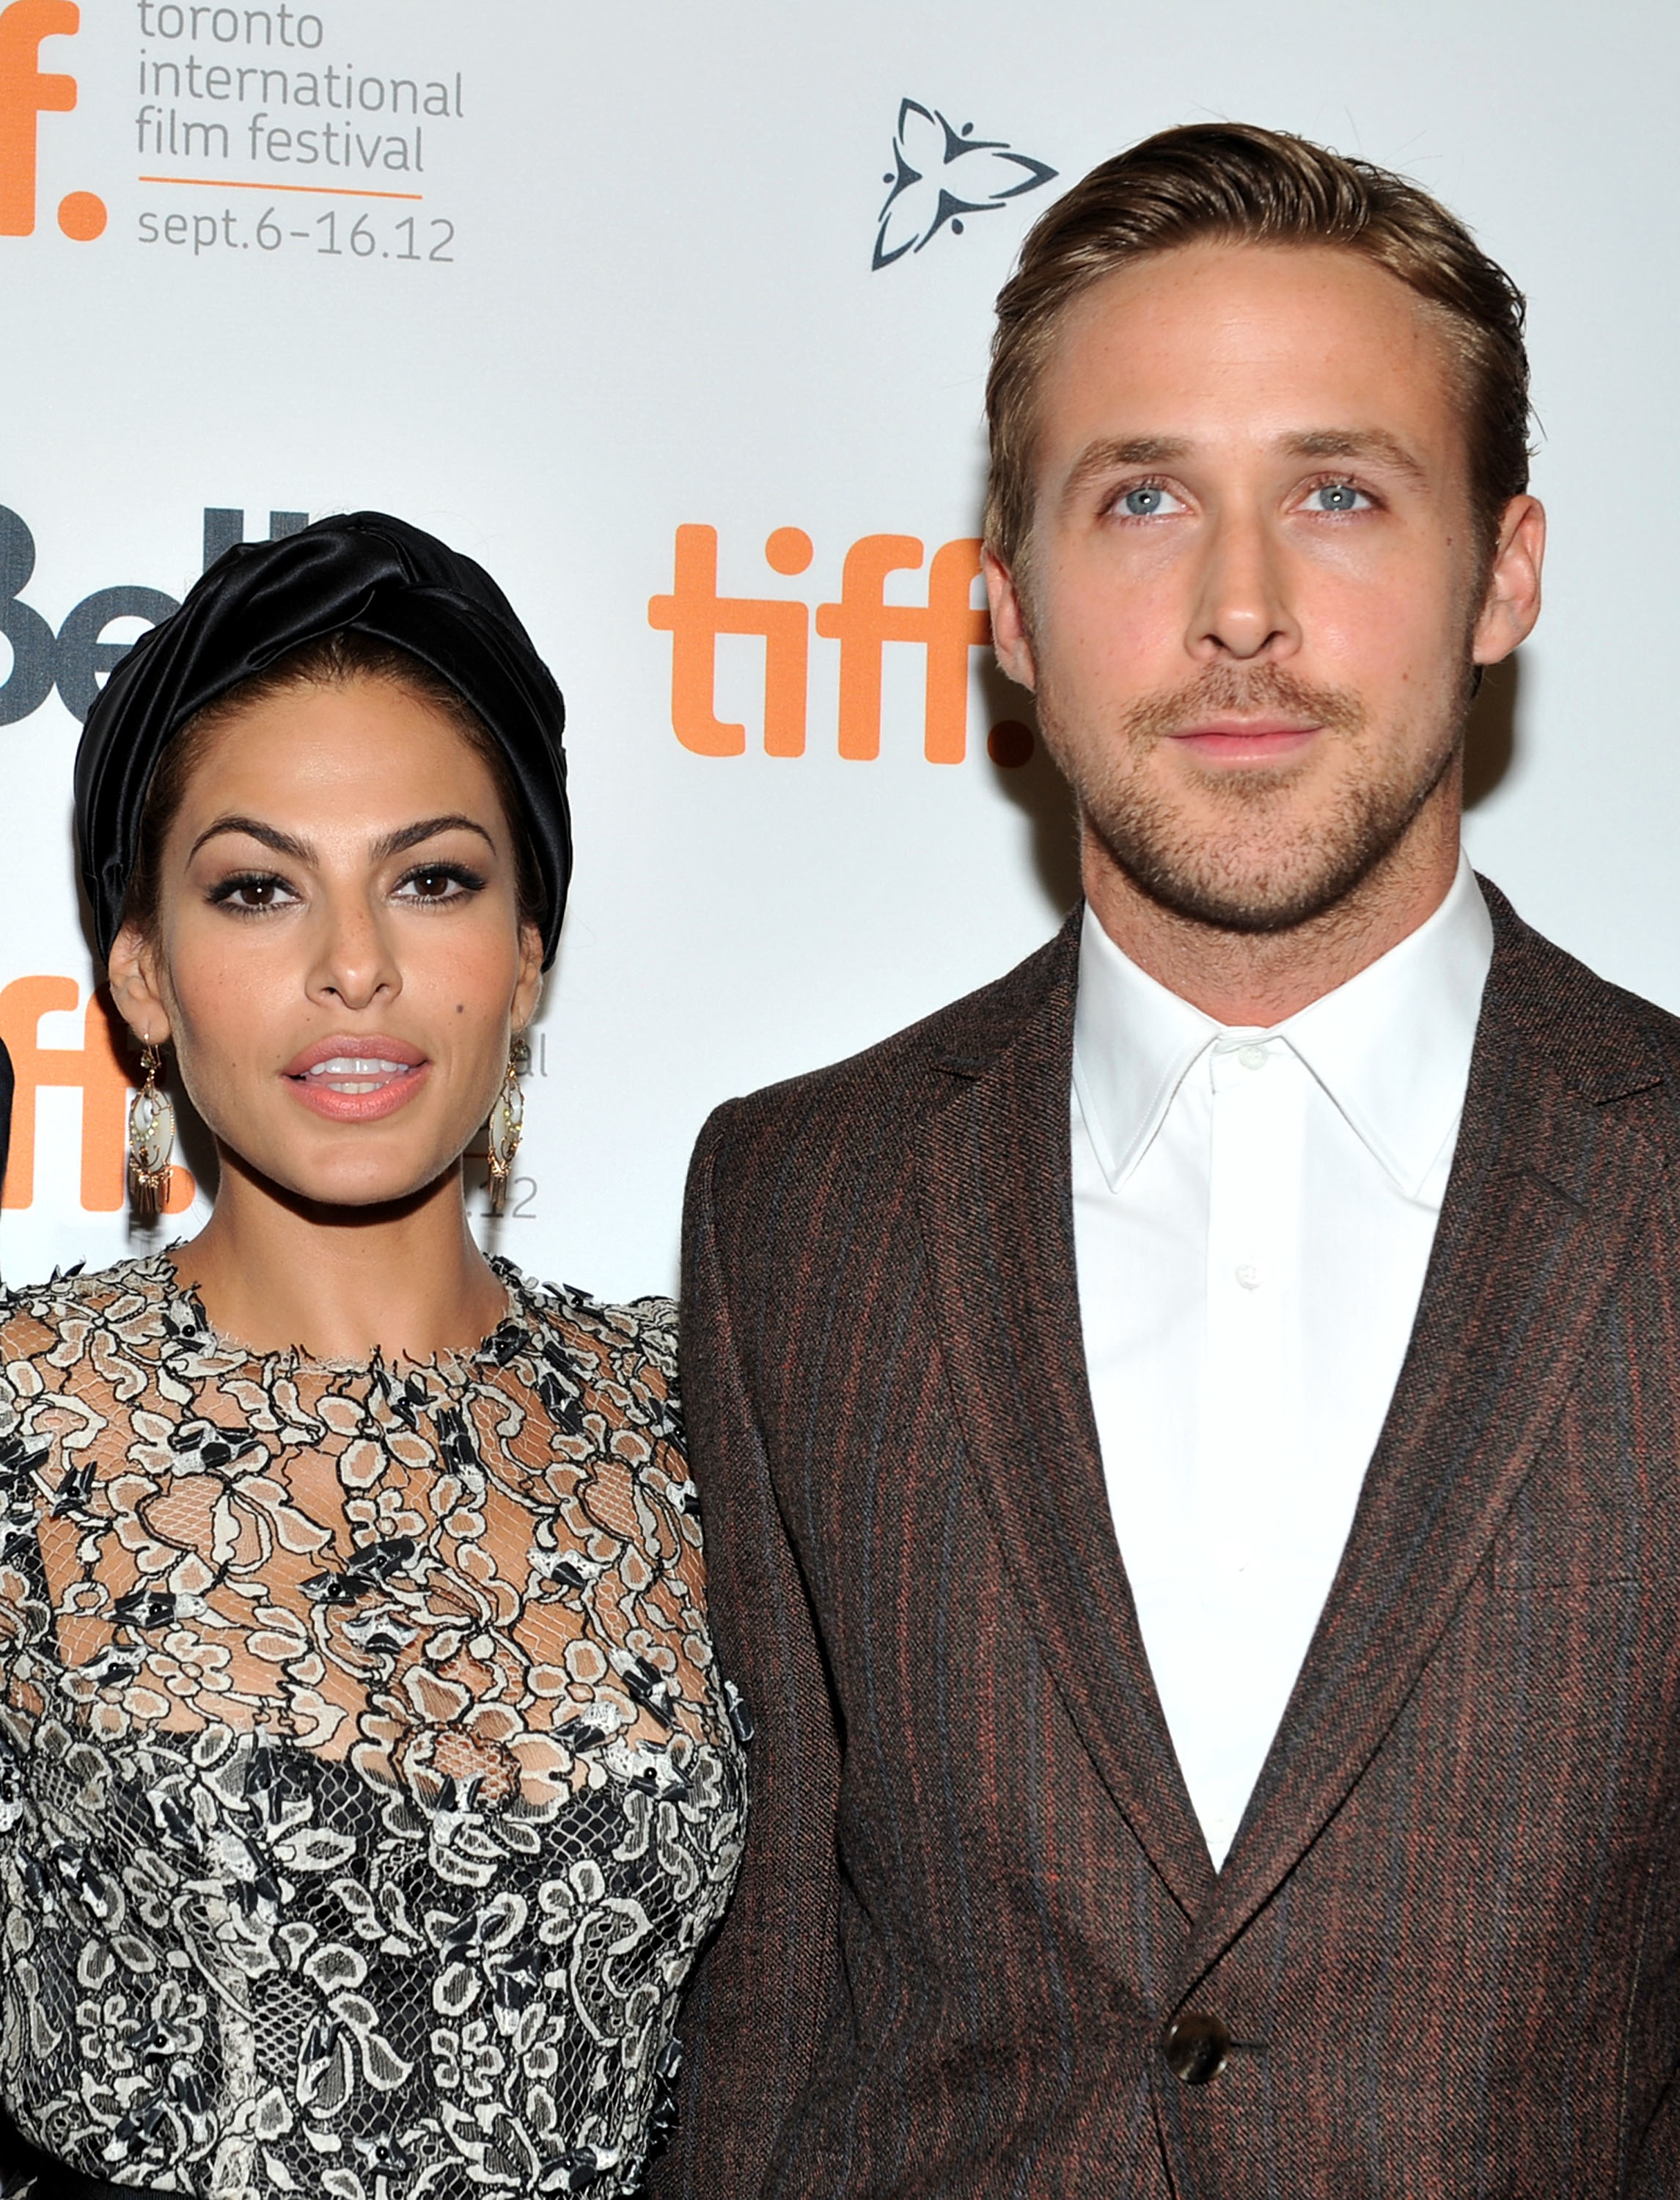 Eva Mendes and Ryan Gosling pose together for a photo